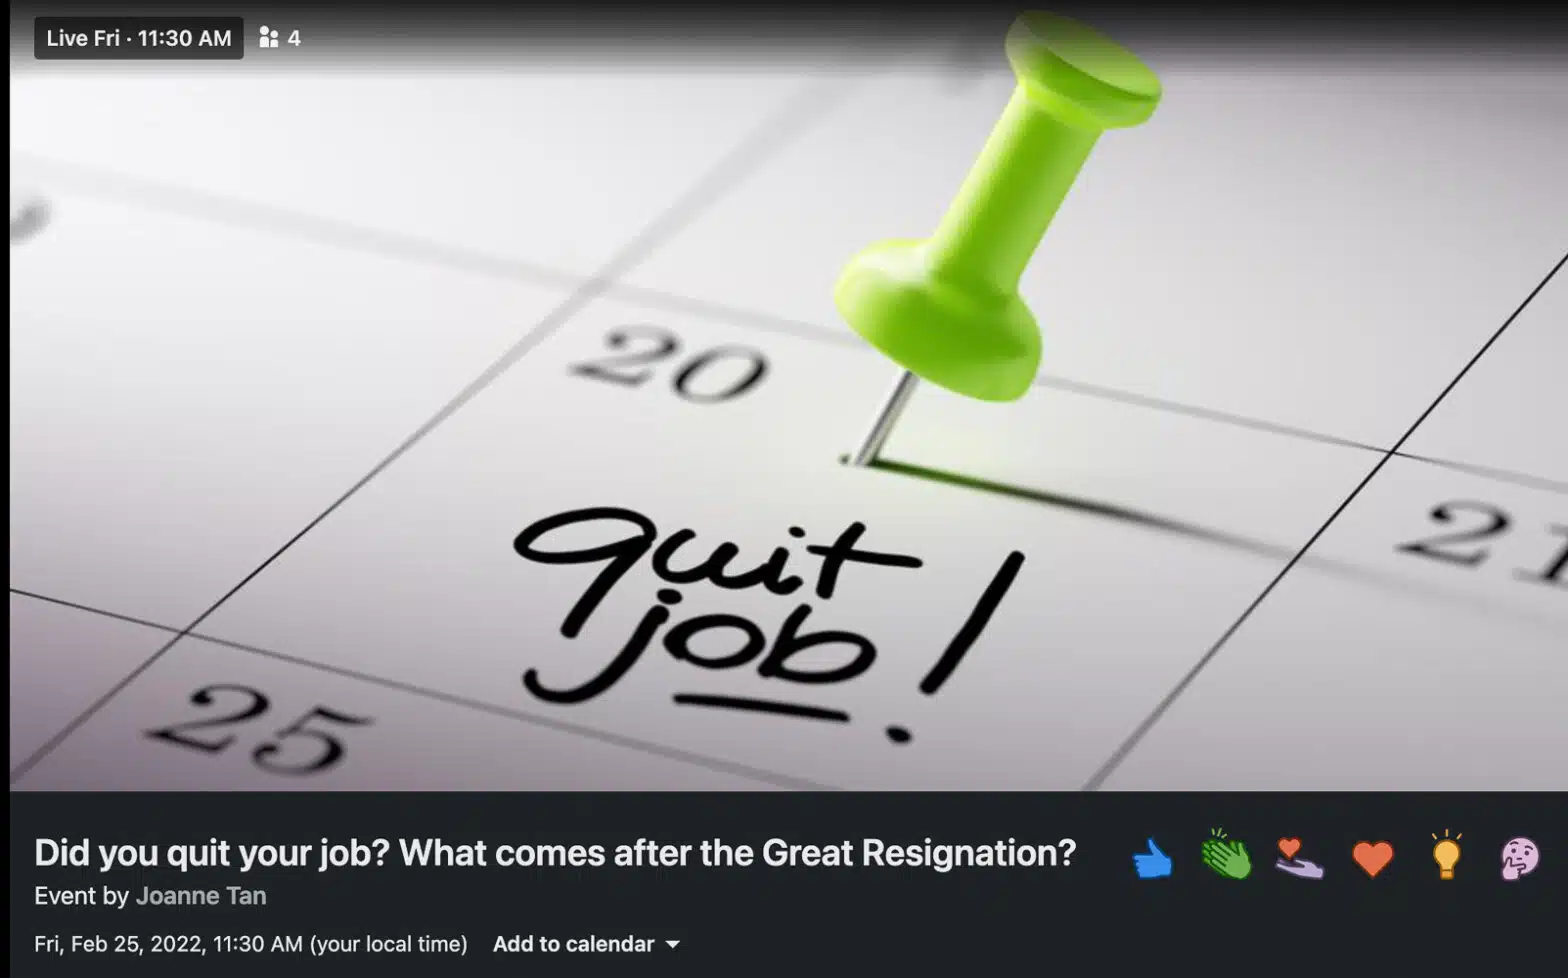 Joanne Z. Tan, global branding expert,10 Plus Brand, Inc. will talk about what's ahead of careers changers, job quitters of the Great Resignation on LinkedIn